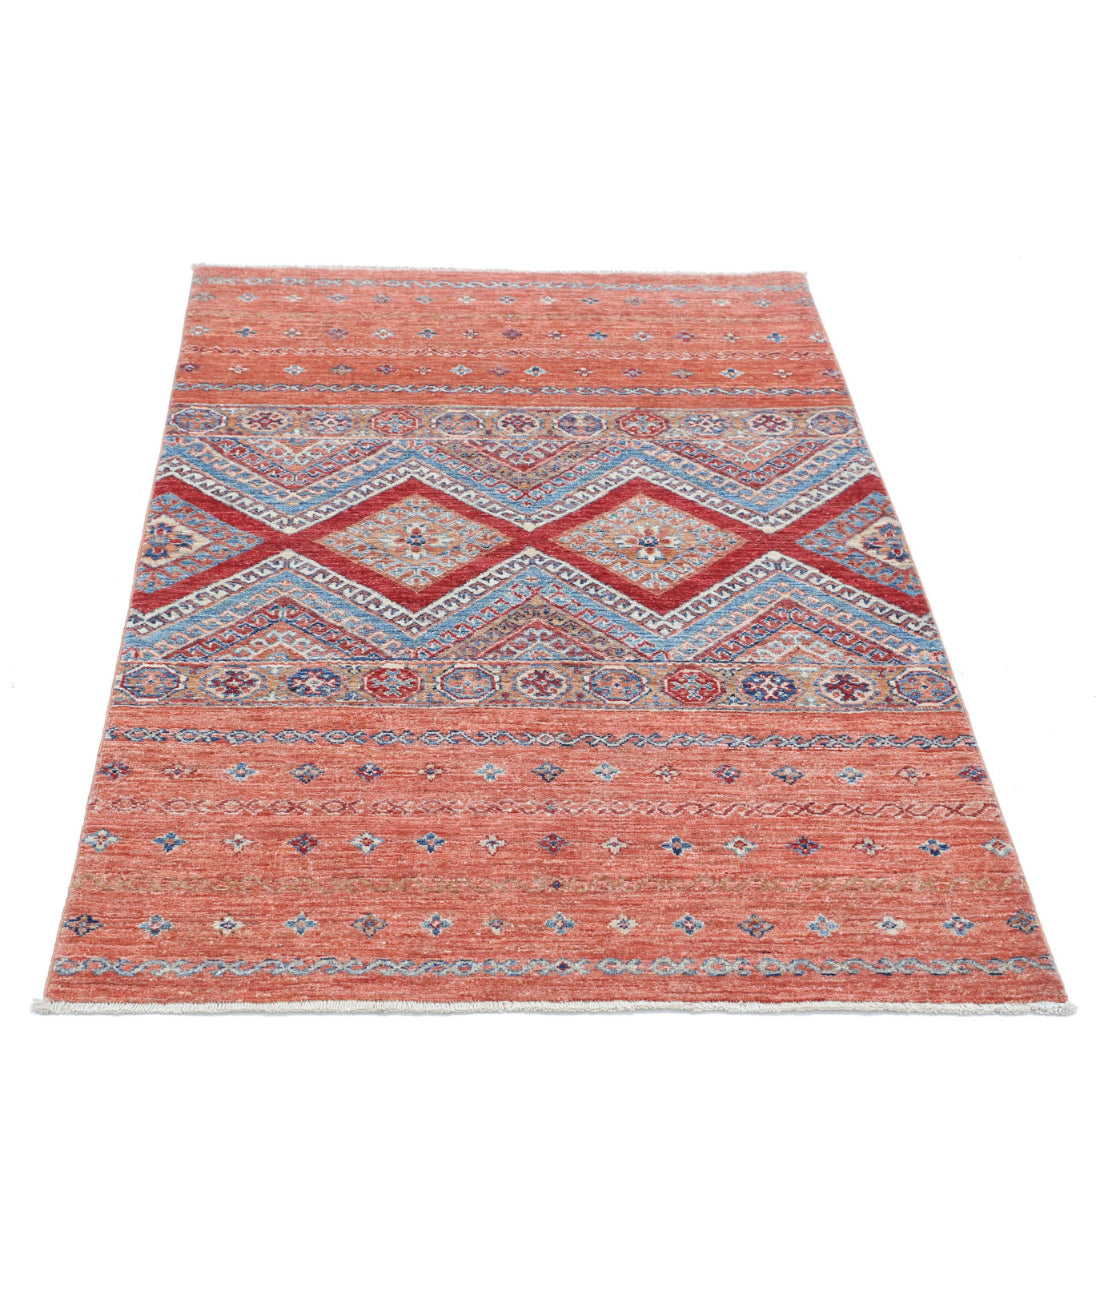 Hand Knotted Khurjeen Wool Rug - 3'4'' x 4'9'' 3'4'' x 4'9'' (100 X 143) / Multi / Multi